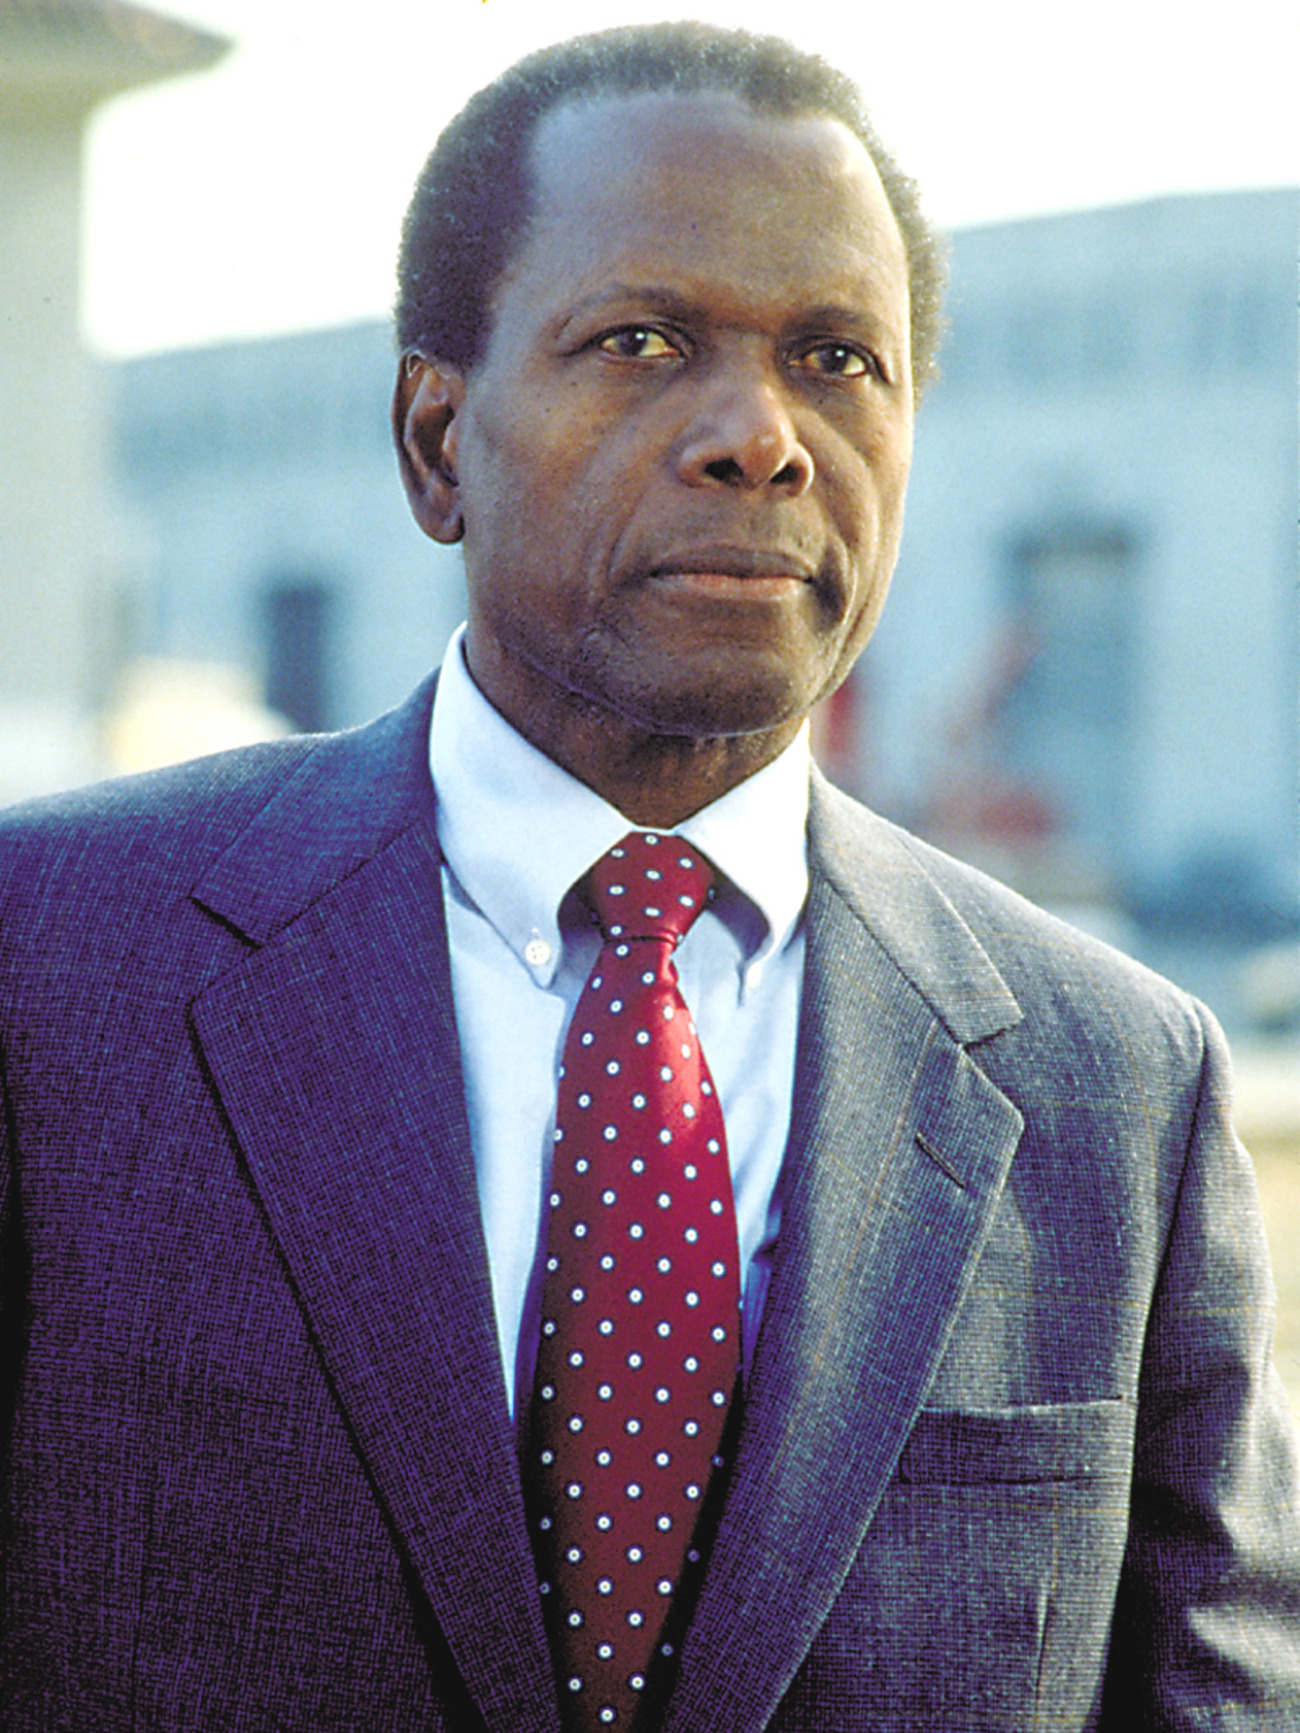 Ktchenor images Sidney Poitier HD wallpaper and background photos